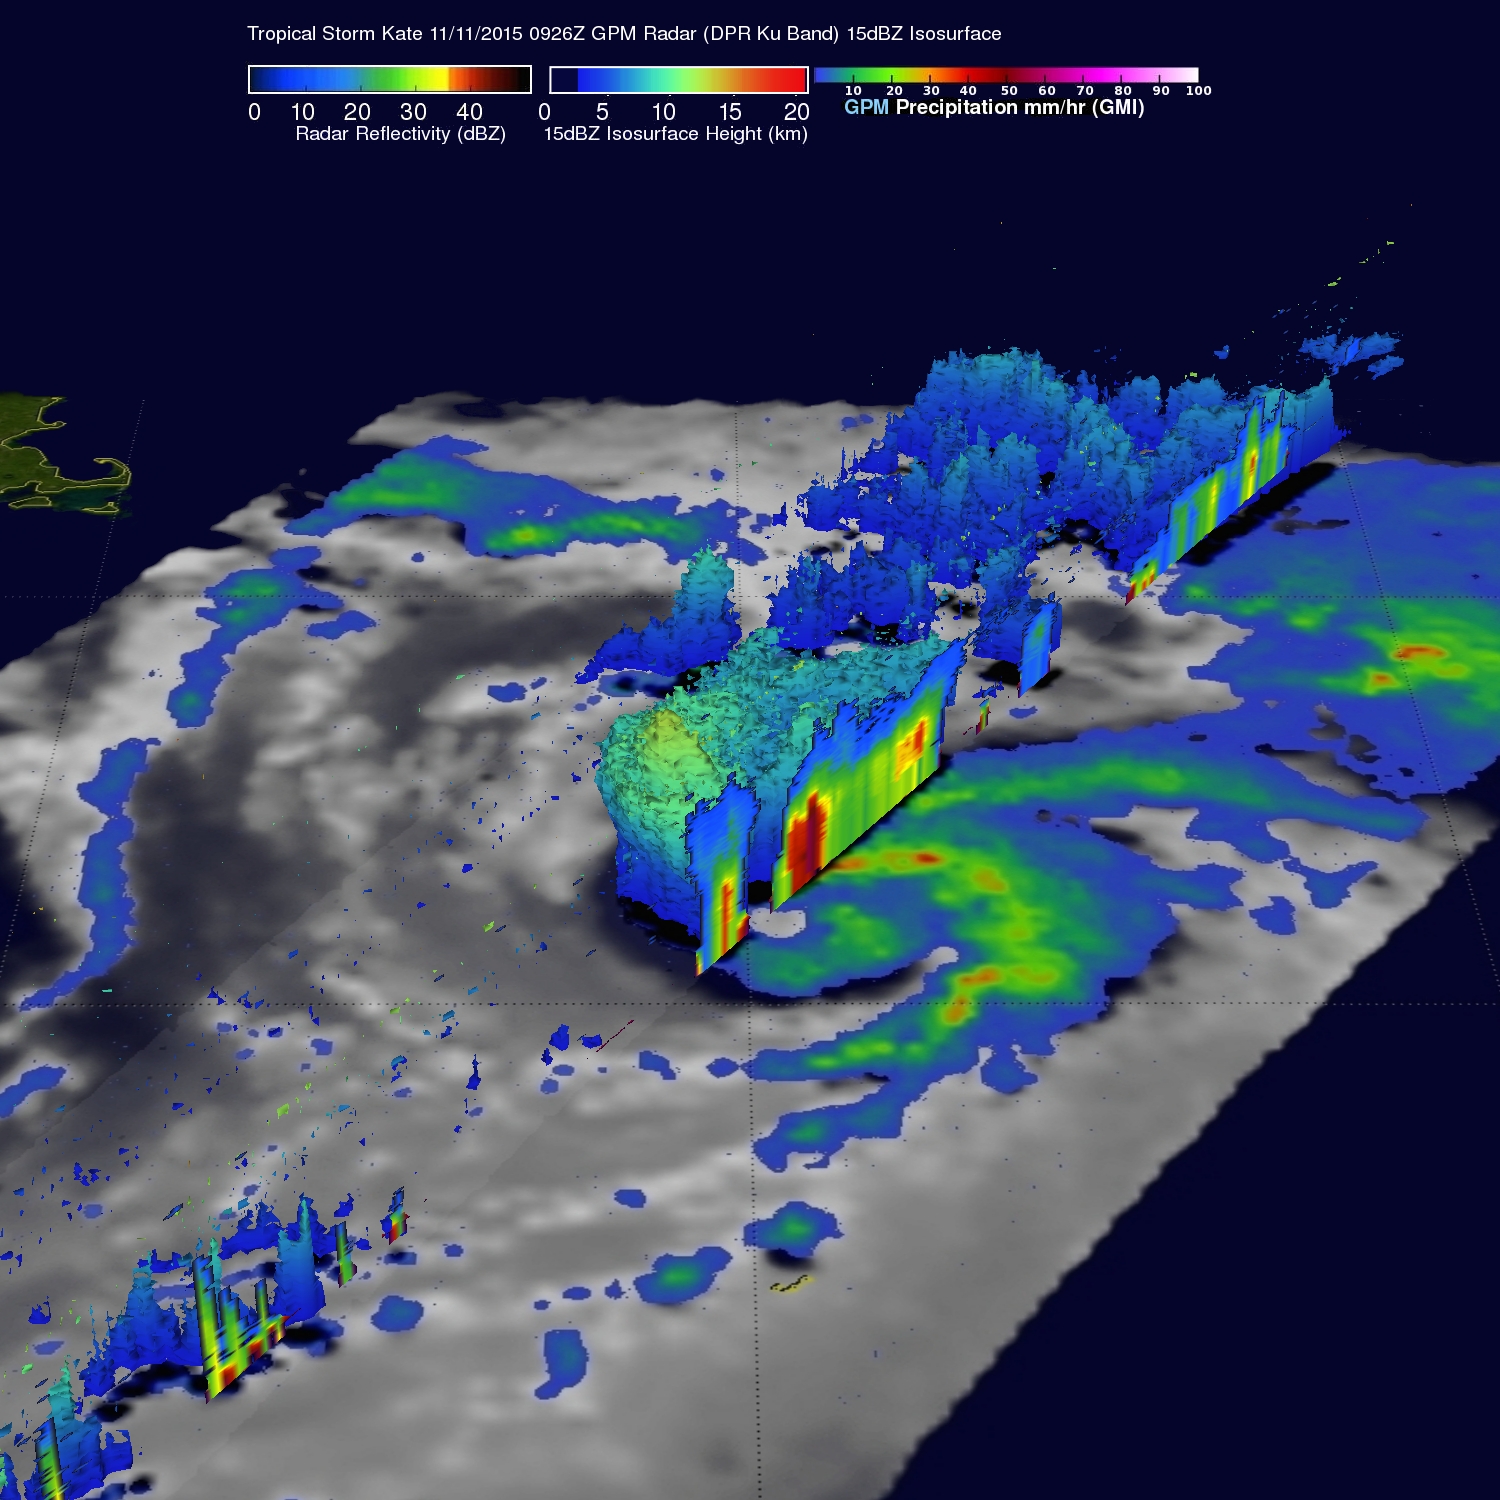 GPM image of Kate